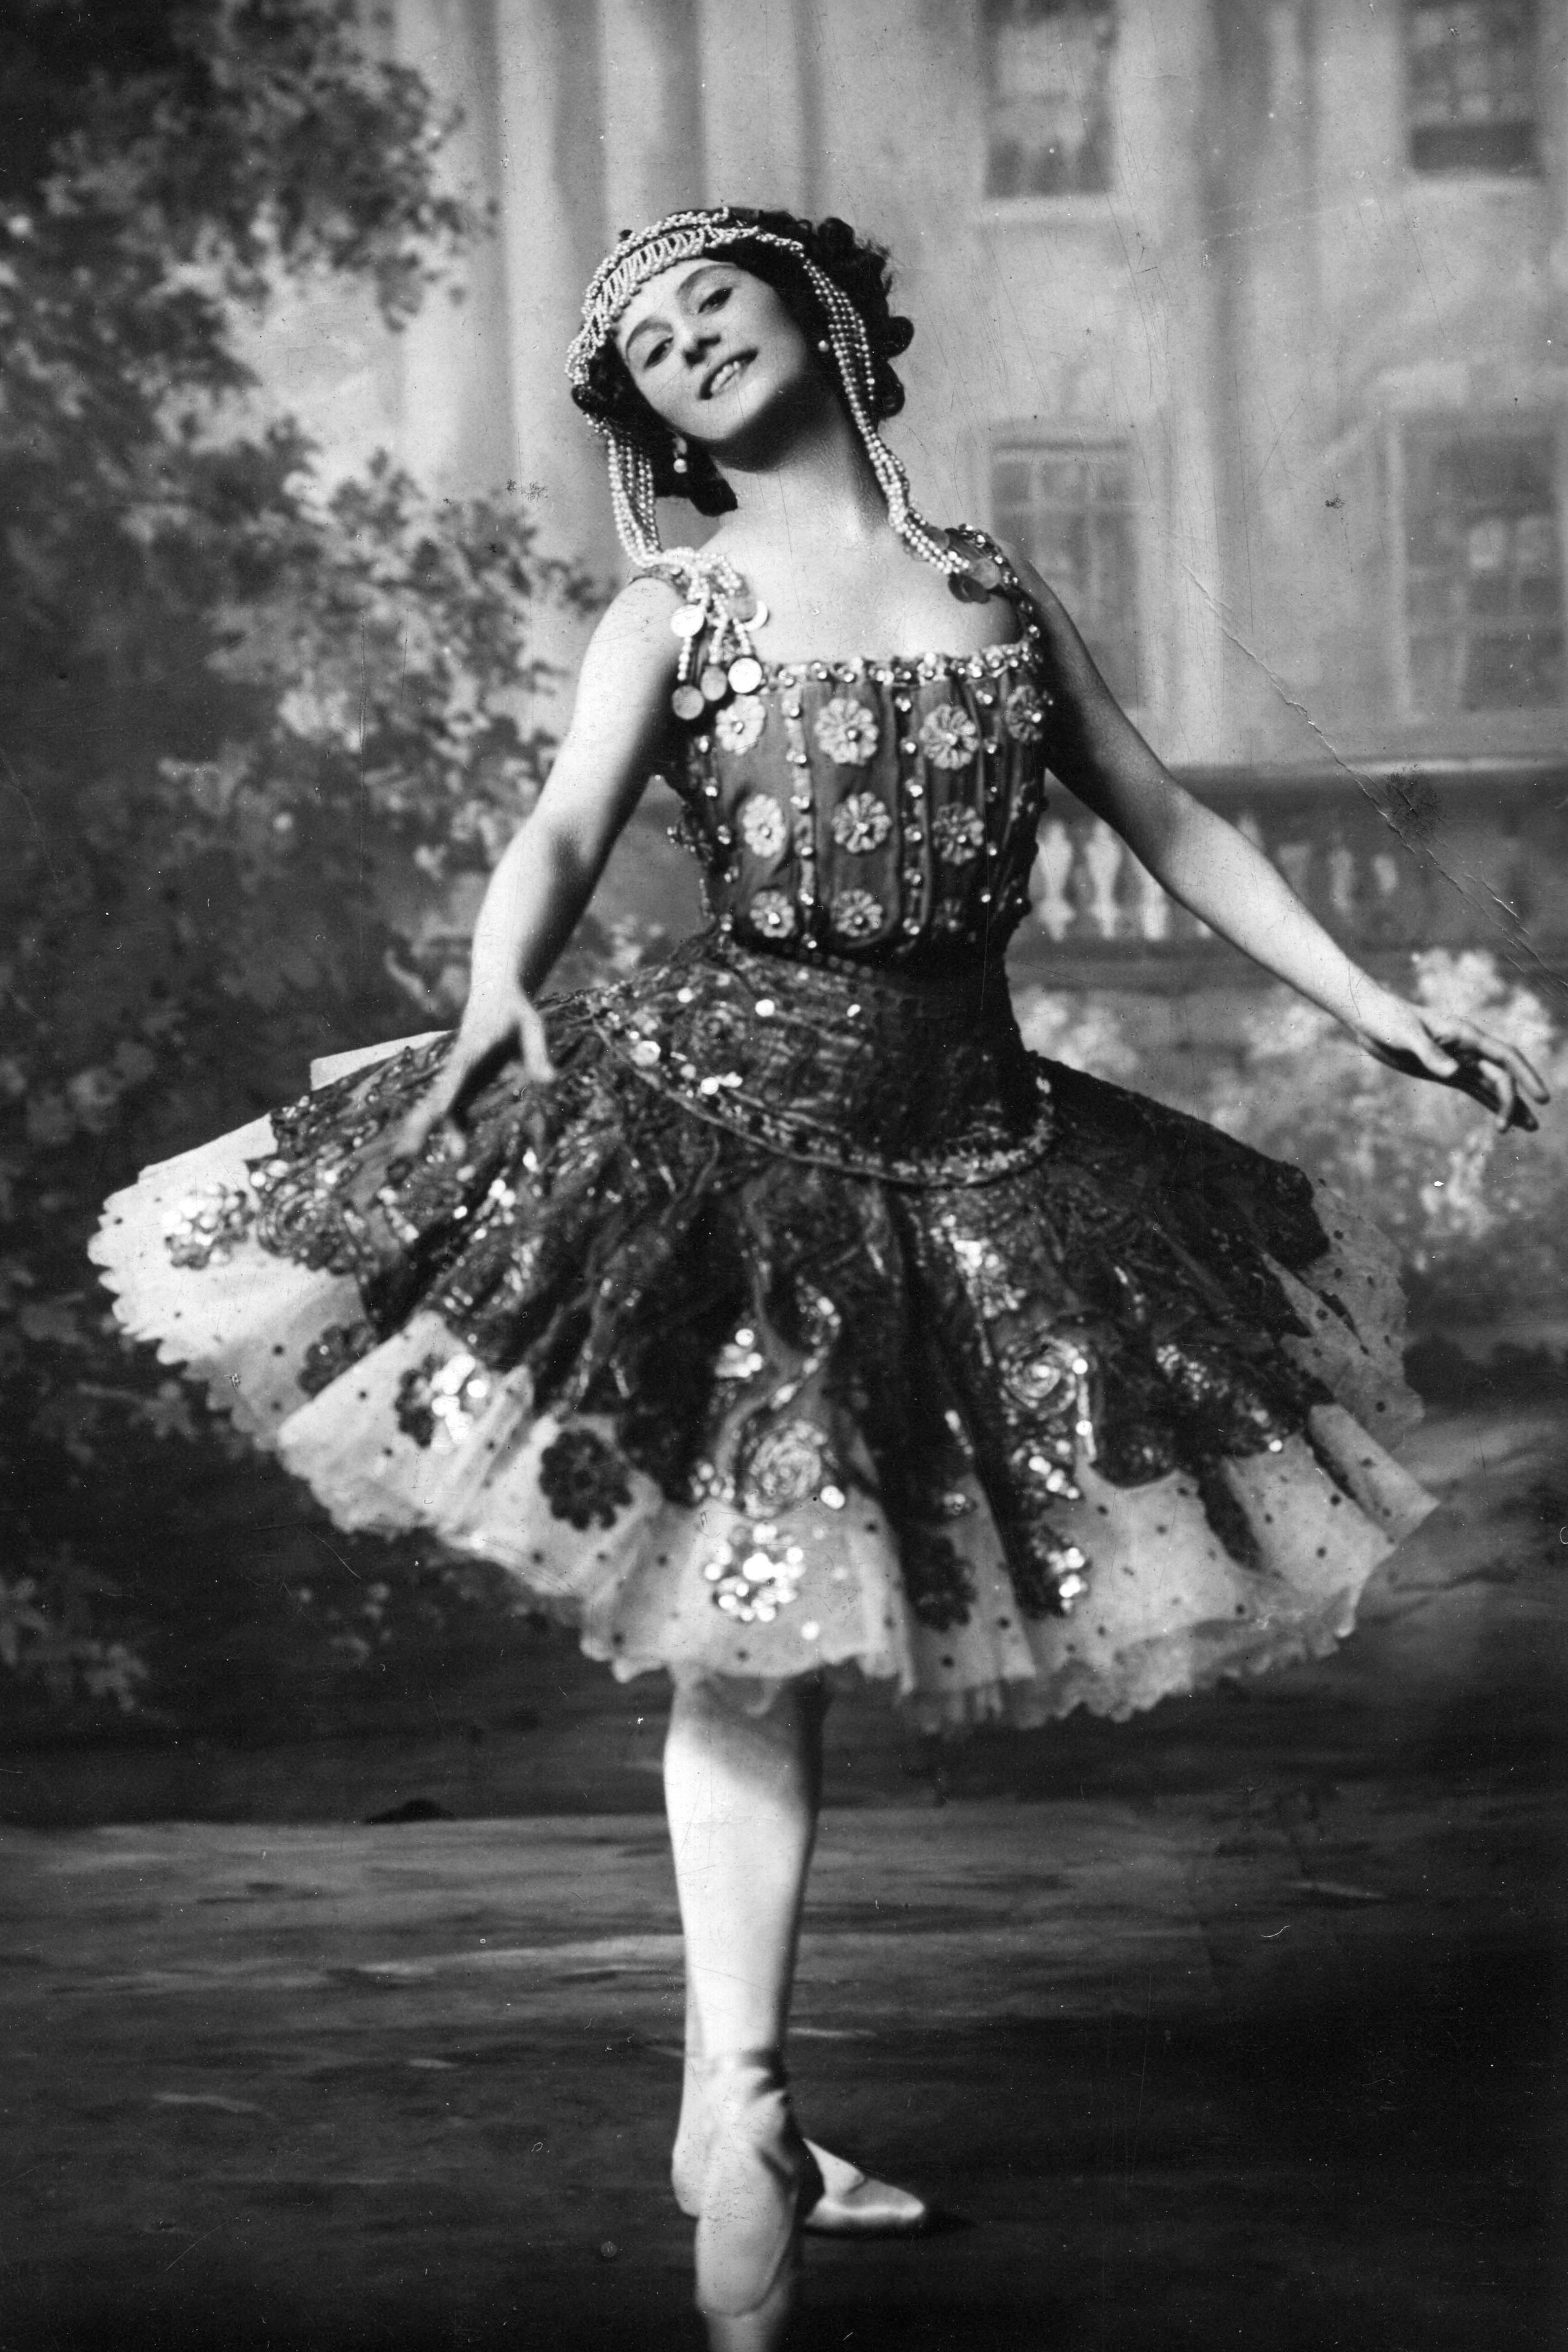 In full costume a happy Anna Pavlova strikes a pose for a photo postcard produced in Paris France around 1910.